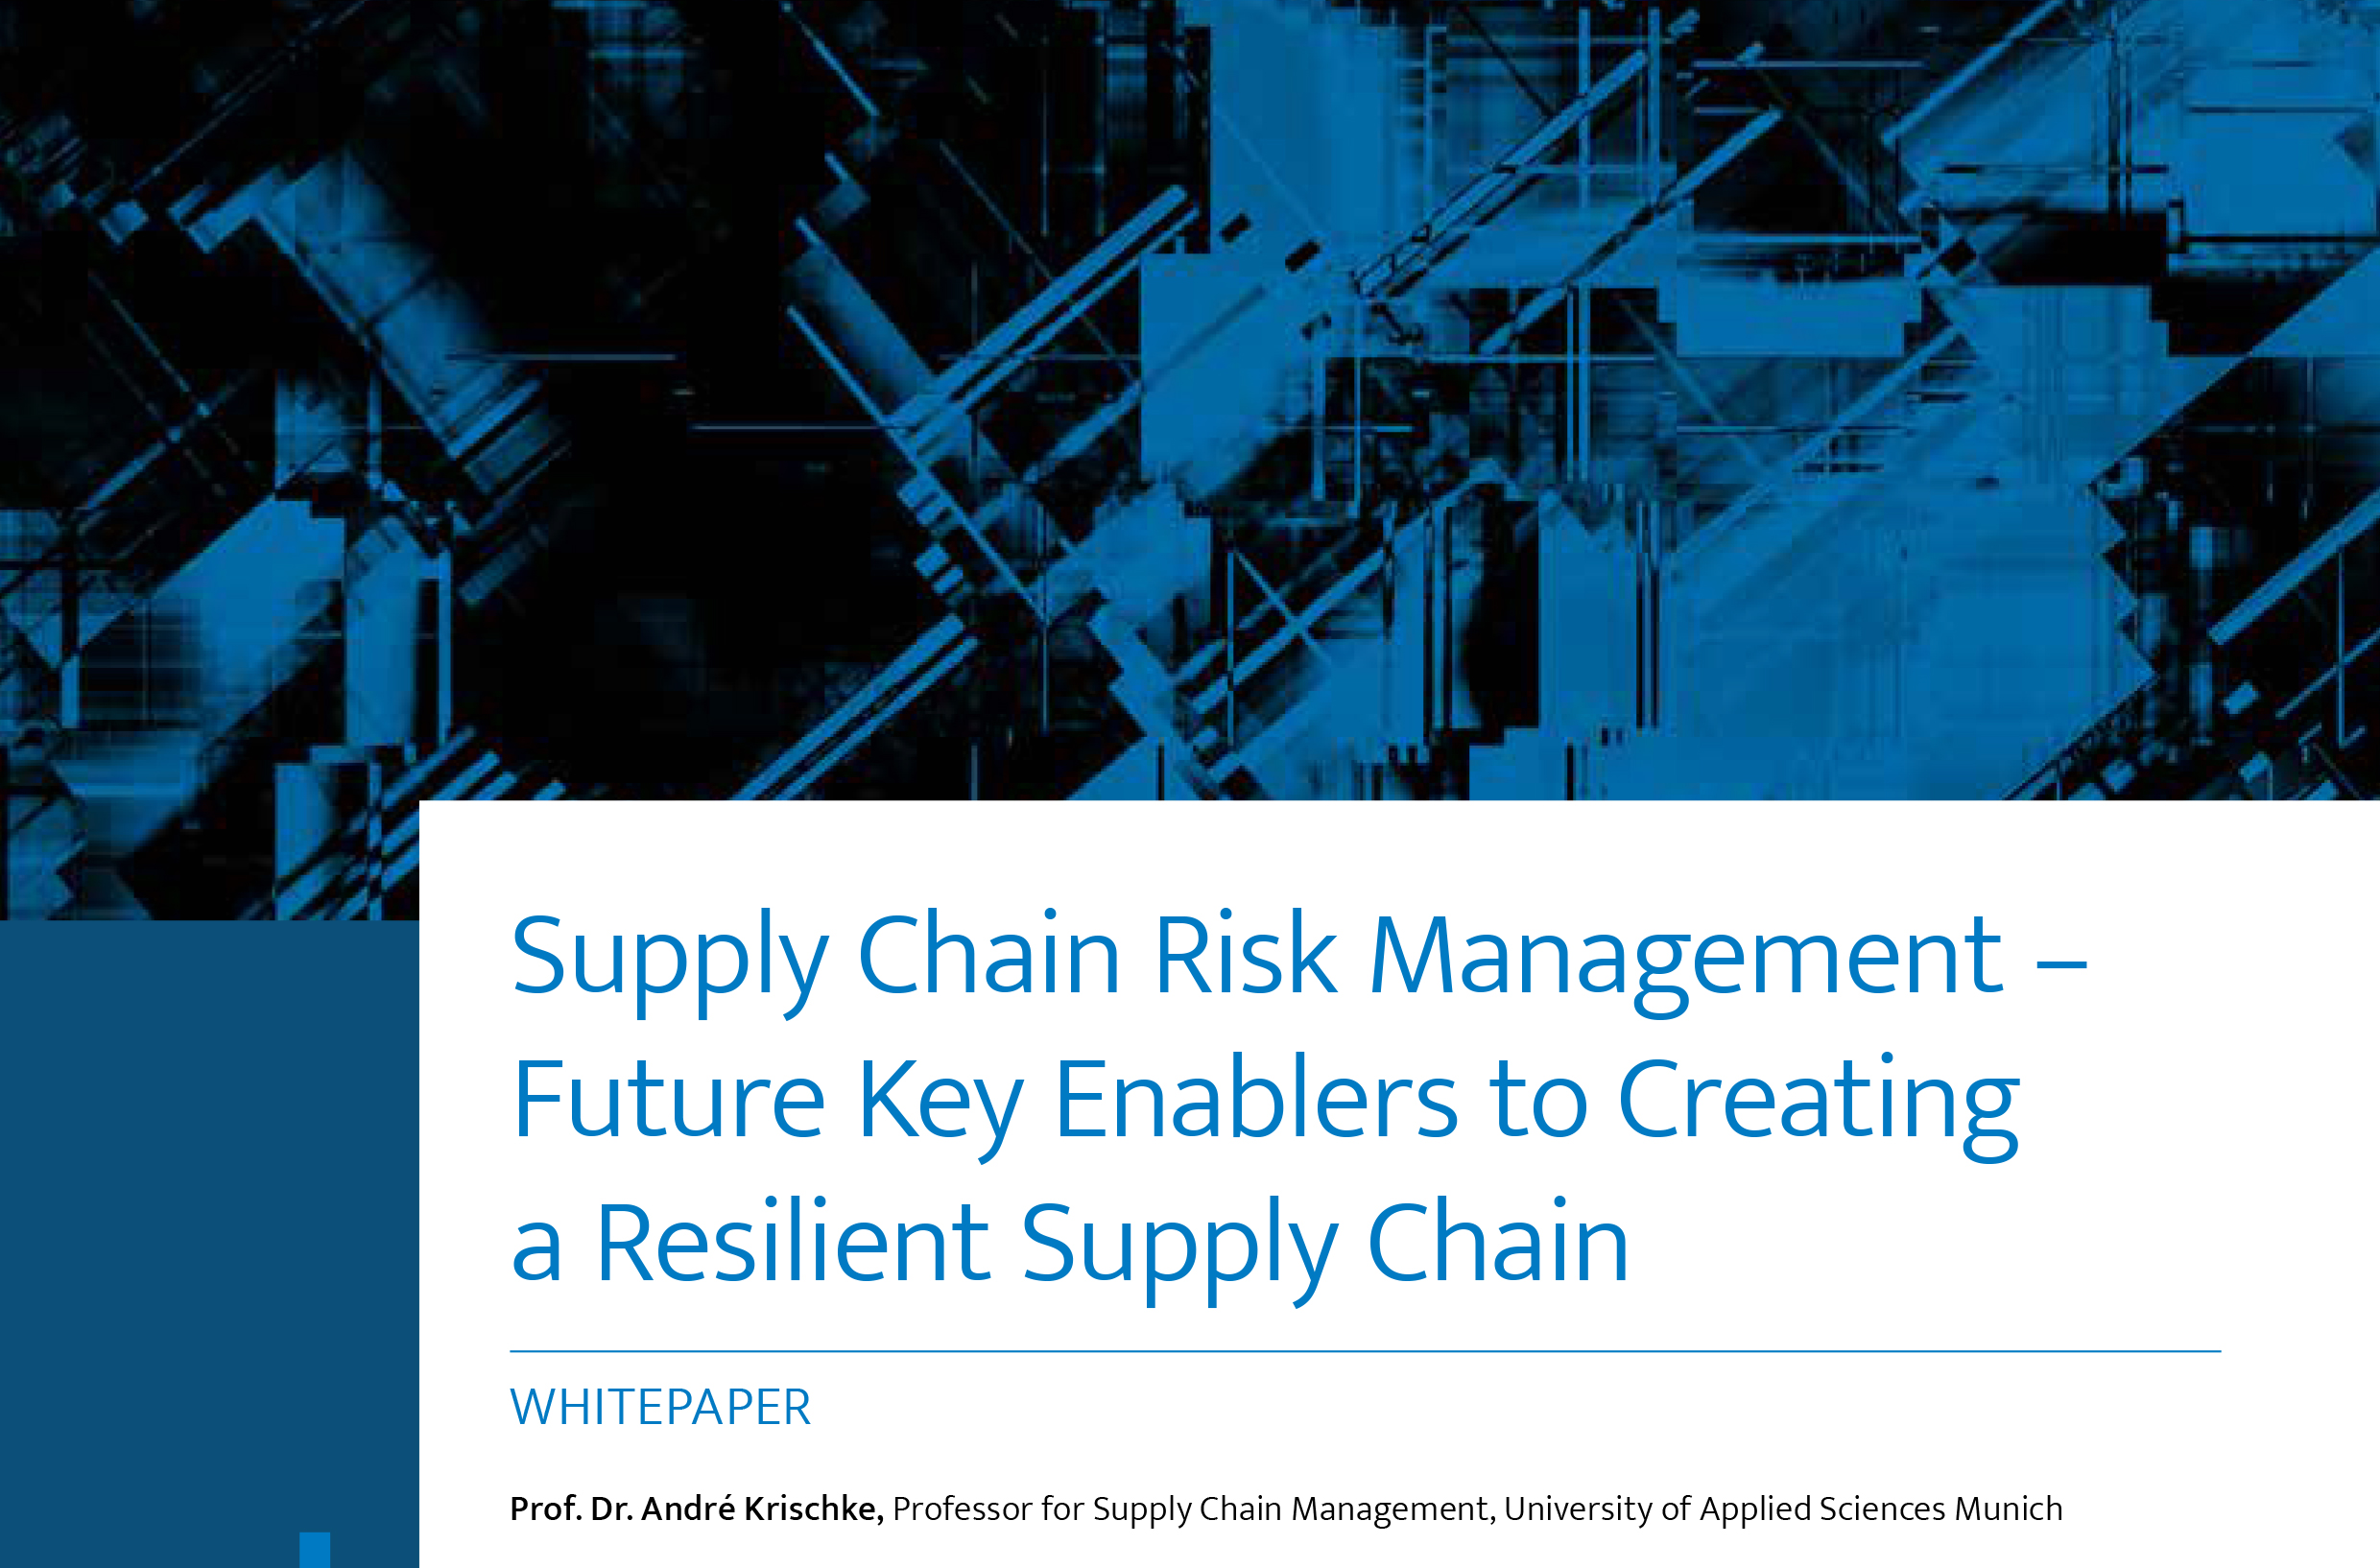 SUPPLY CHAIN RISK MANAGEMENT - FUTURE KEY ENABLERS TO CREATING A RESILIENT SUPPLY CHAIN